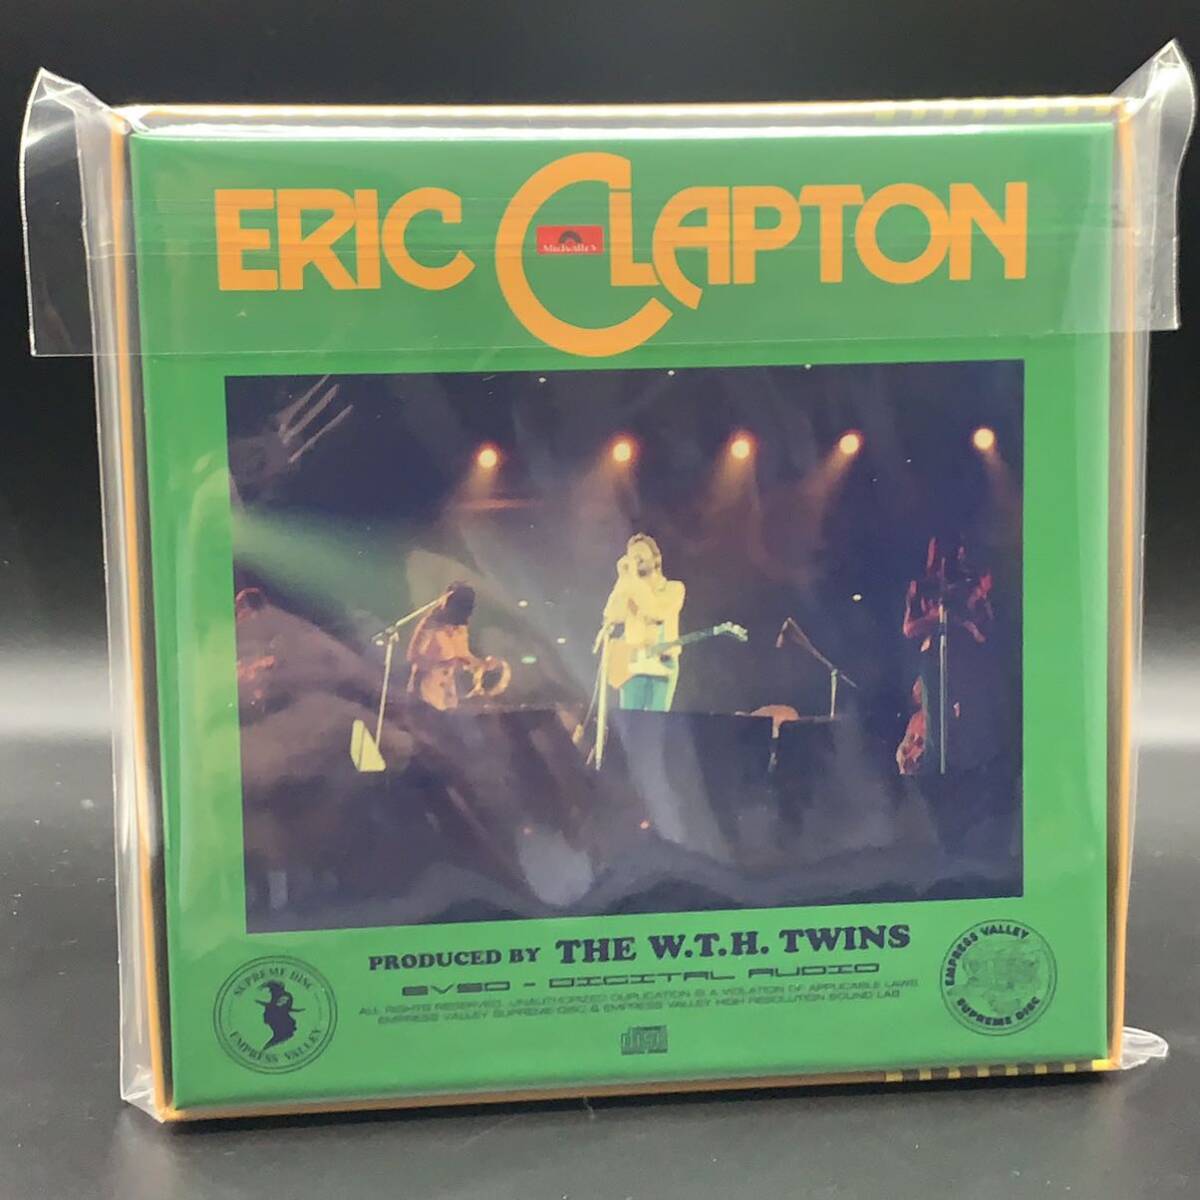 ERIC CLAPTON / TROPICAL SOUND SHOWER「亜熱帯武道館」(6CD BOX with Booklet) 初来日武道館3公演を全て初登場音源で収録した凄いやつ！の画像2